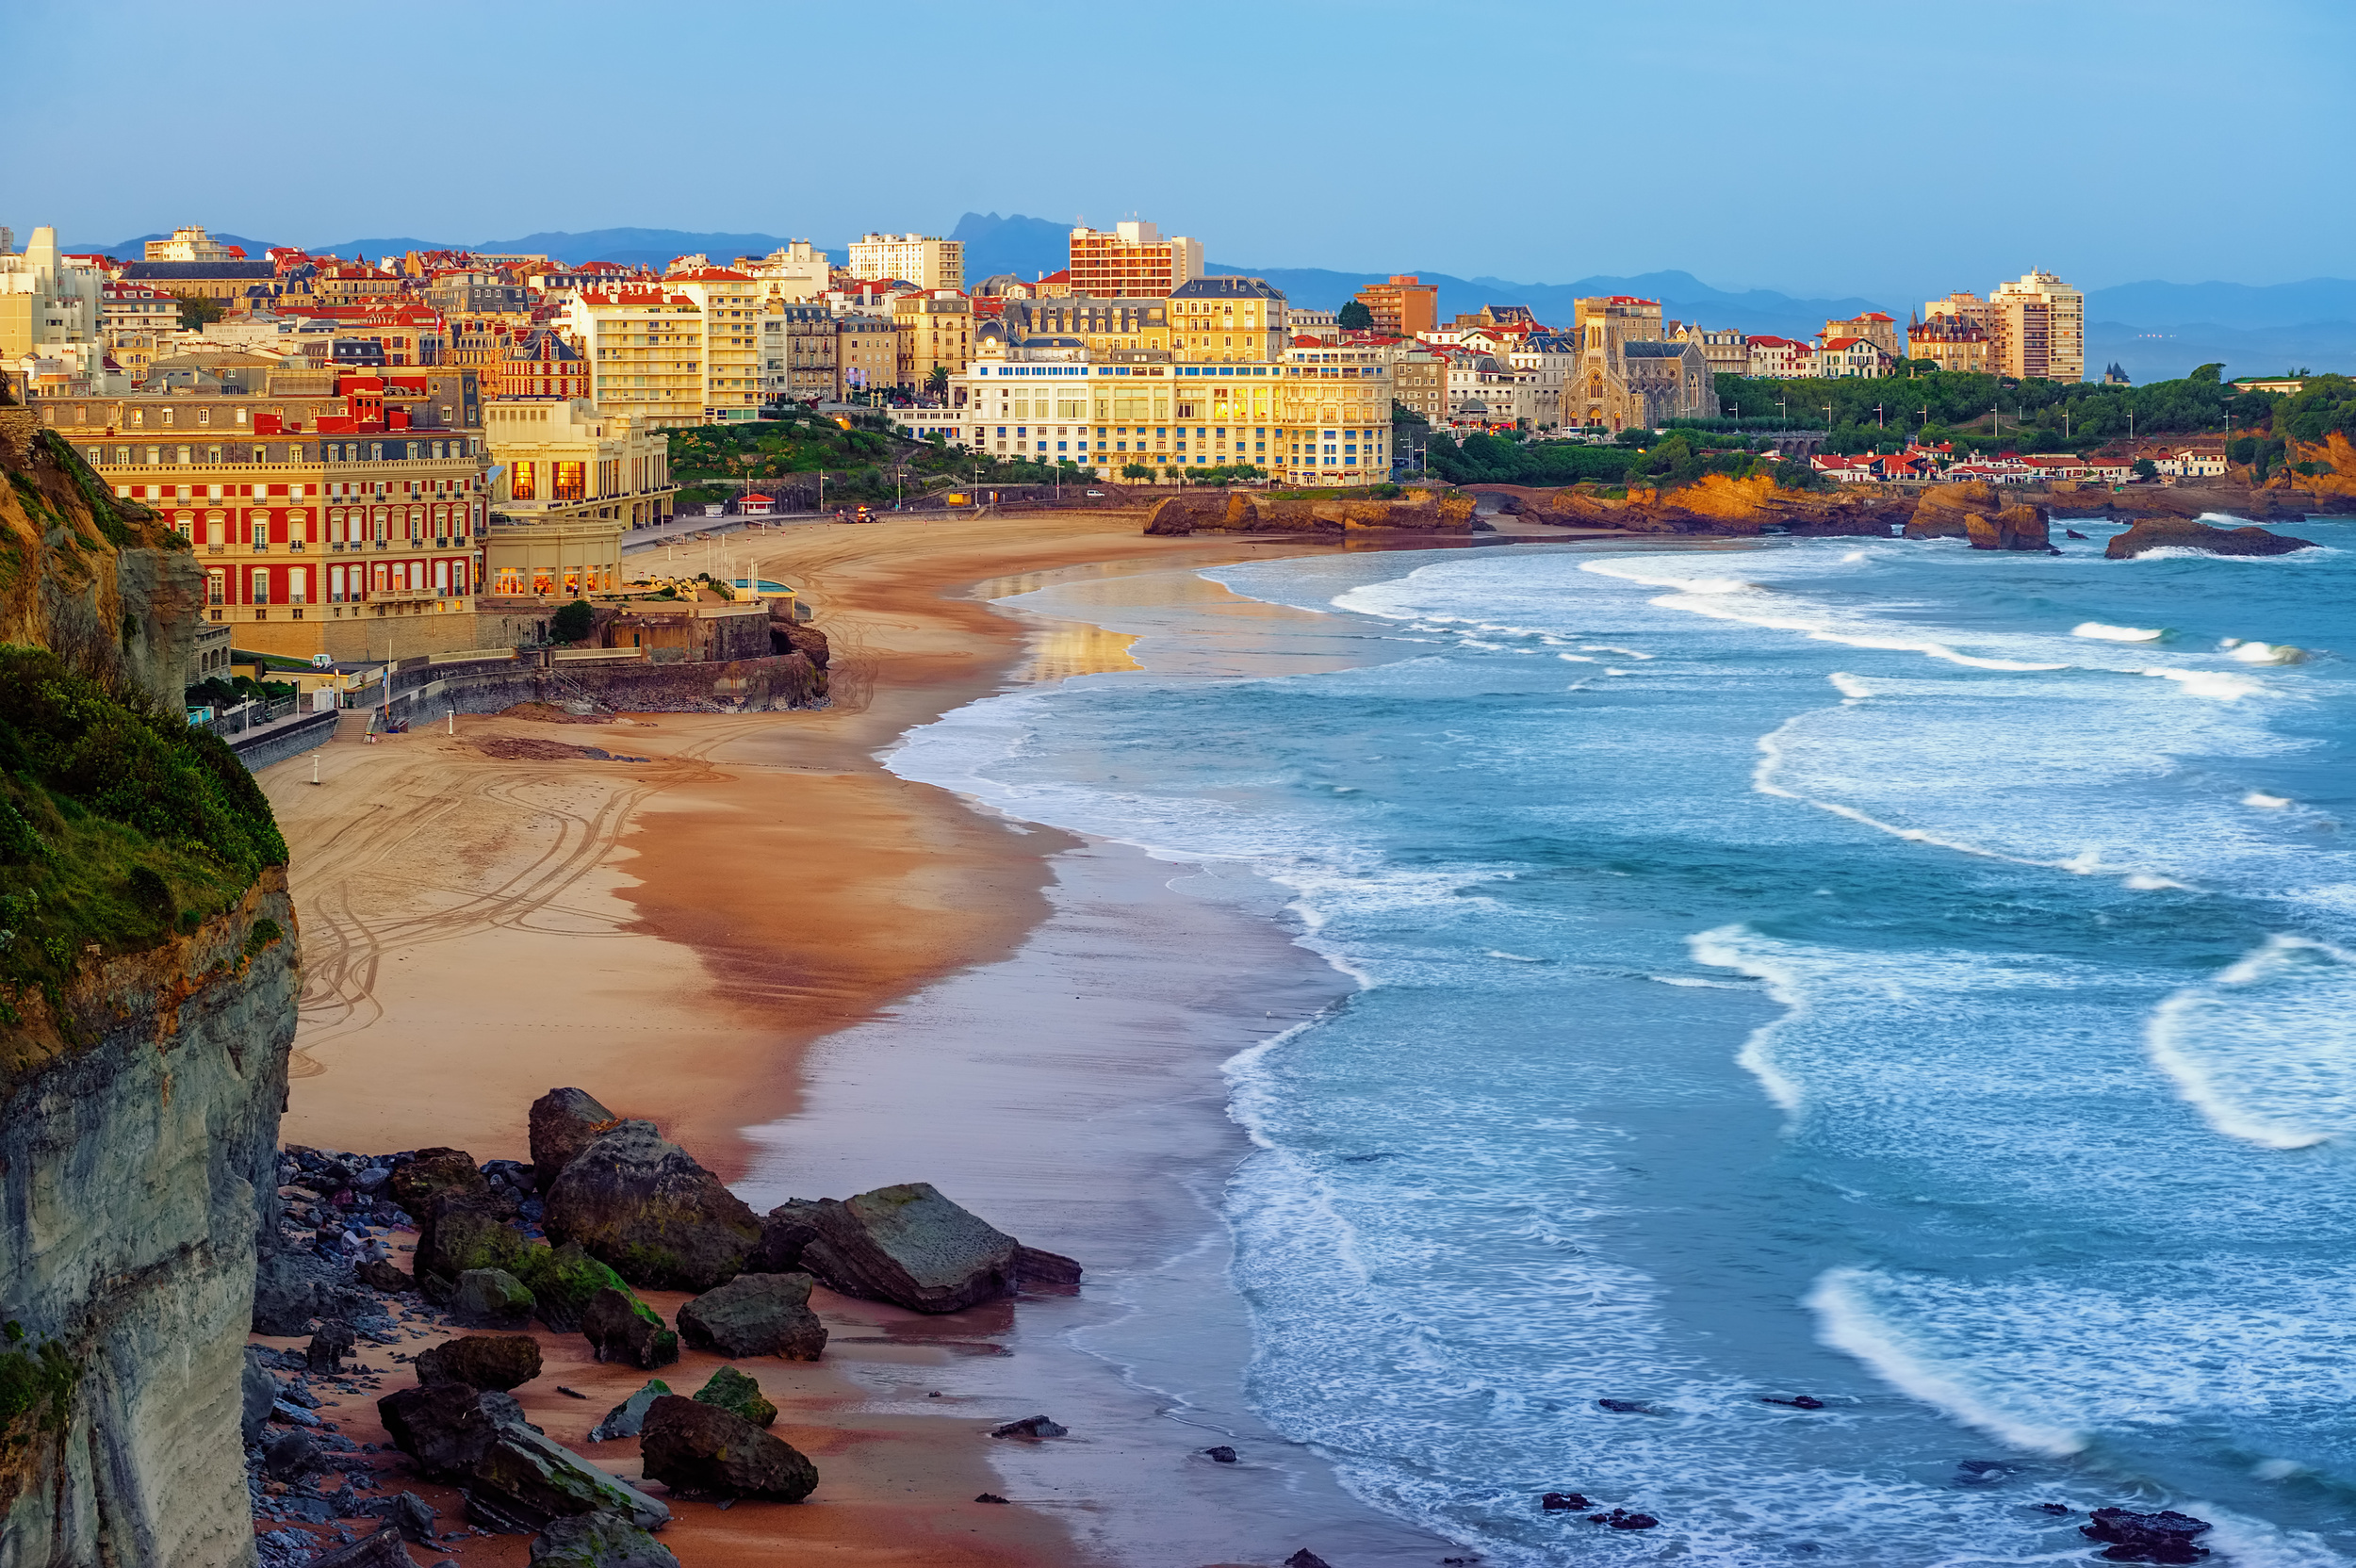 <p>Another gem in the southwest of France, Béziers is an up-and-coming destination popular with surfers. The waves here are some of the best in the country, particularly for beginners.</p><p>You may also like: <a href='https://www.yardbarker.com/lifestyle/articles/protein_packed_foods_that_will_help_fuel_your_muscles_113023/s1__34248305'>Protein-packed foods that will help fuel your muscles</a></p>